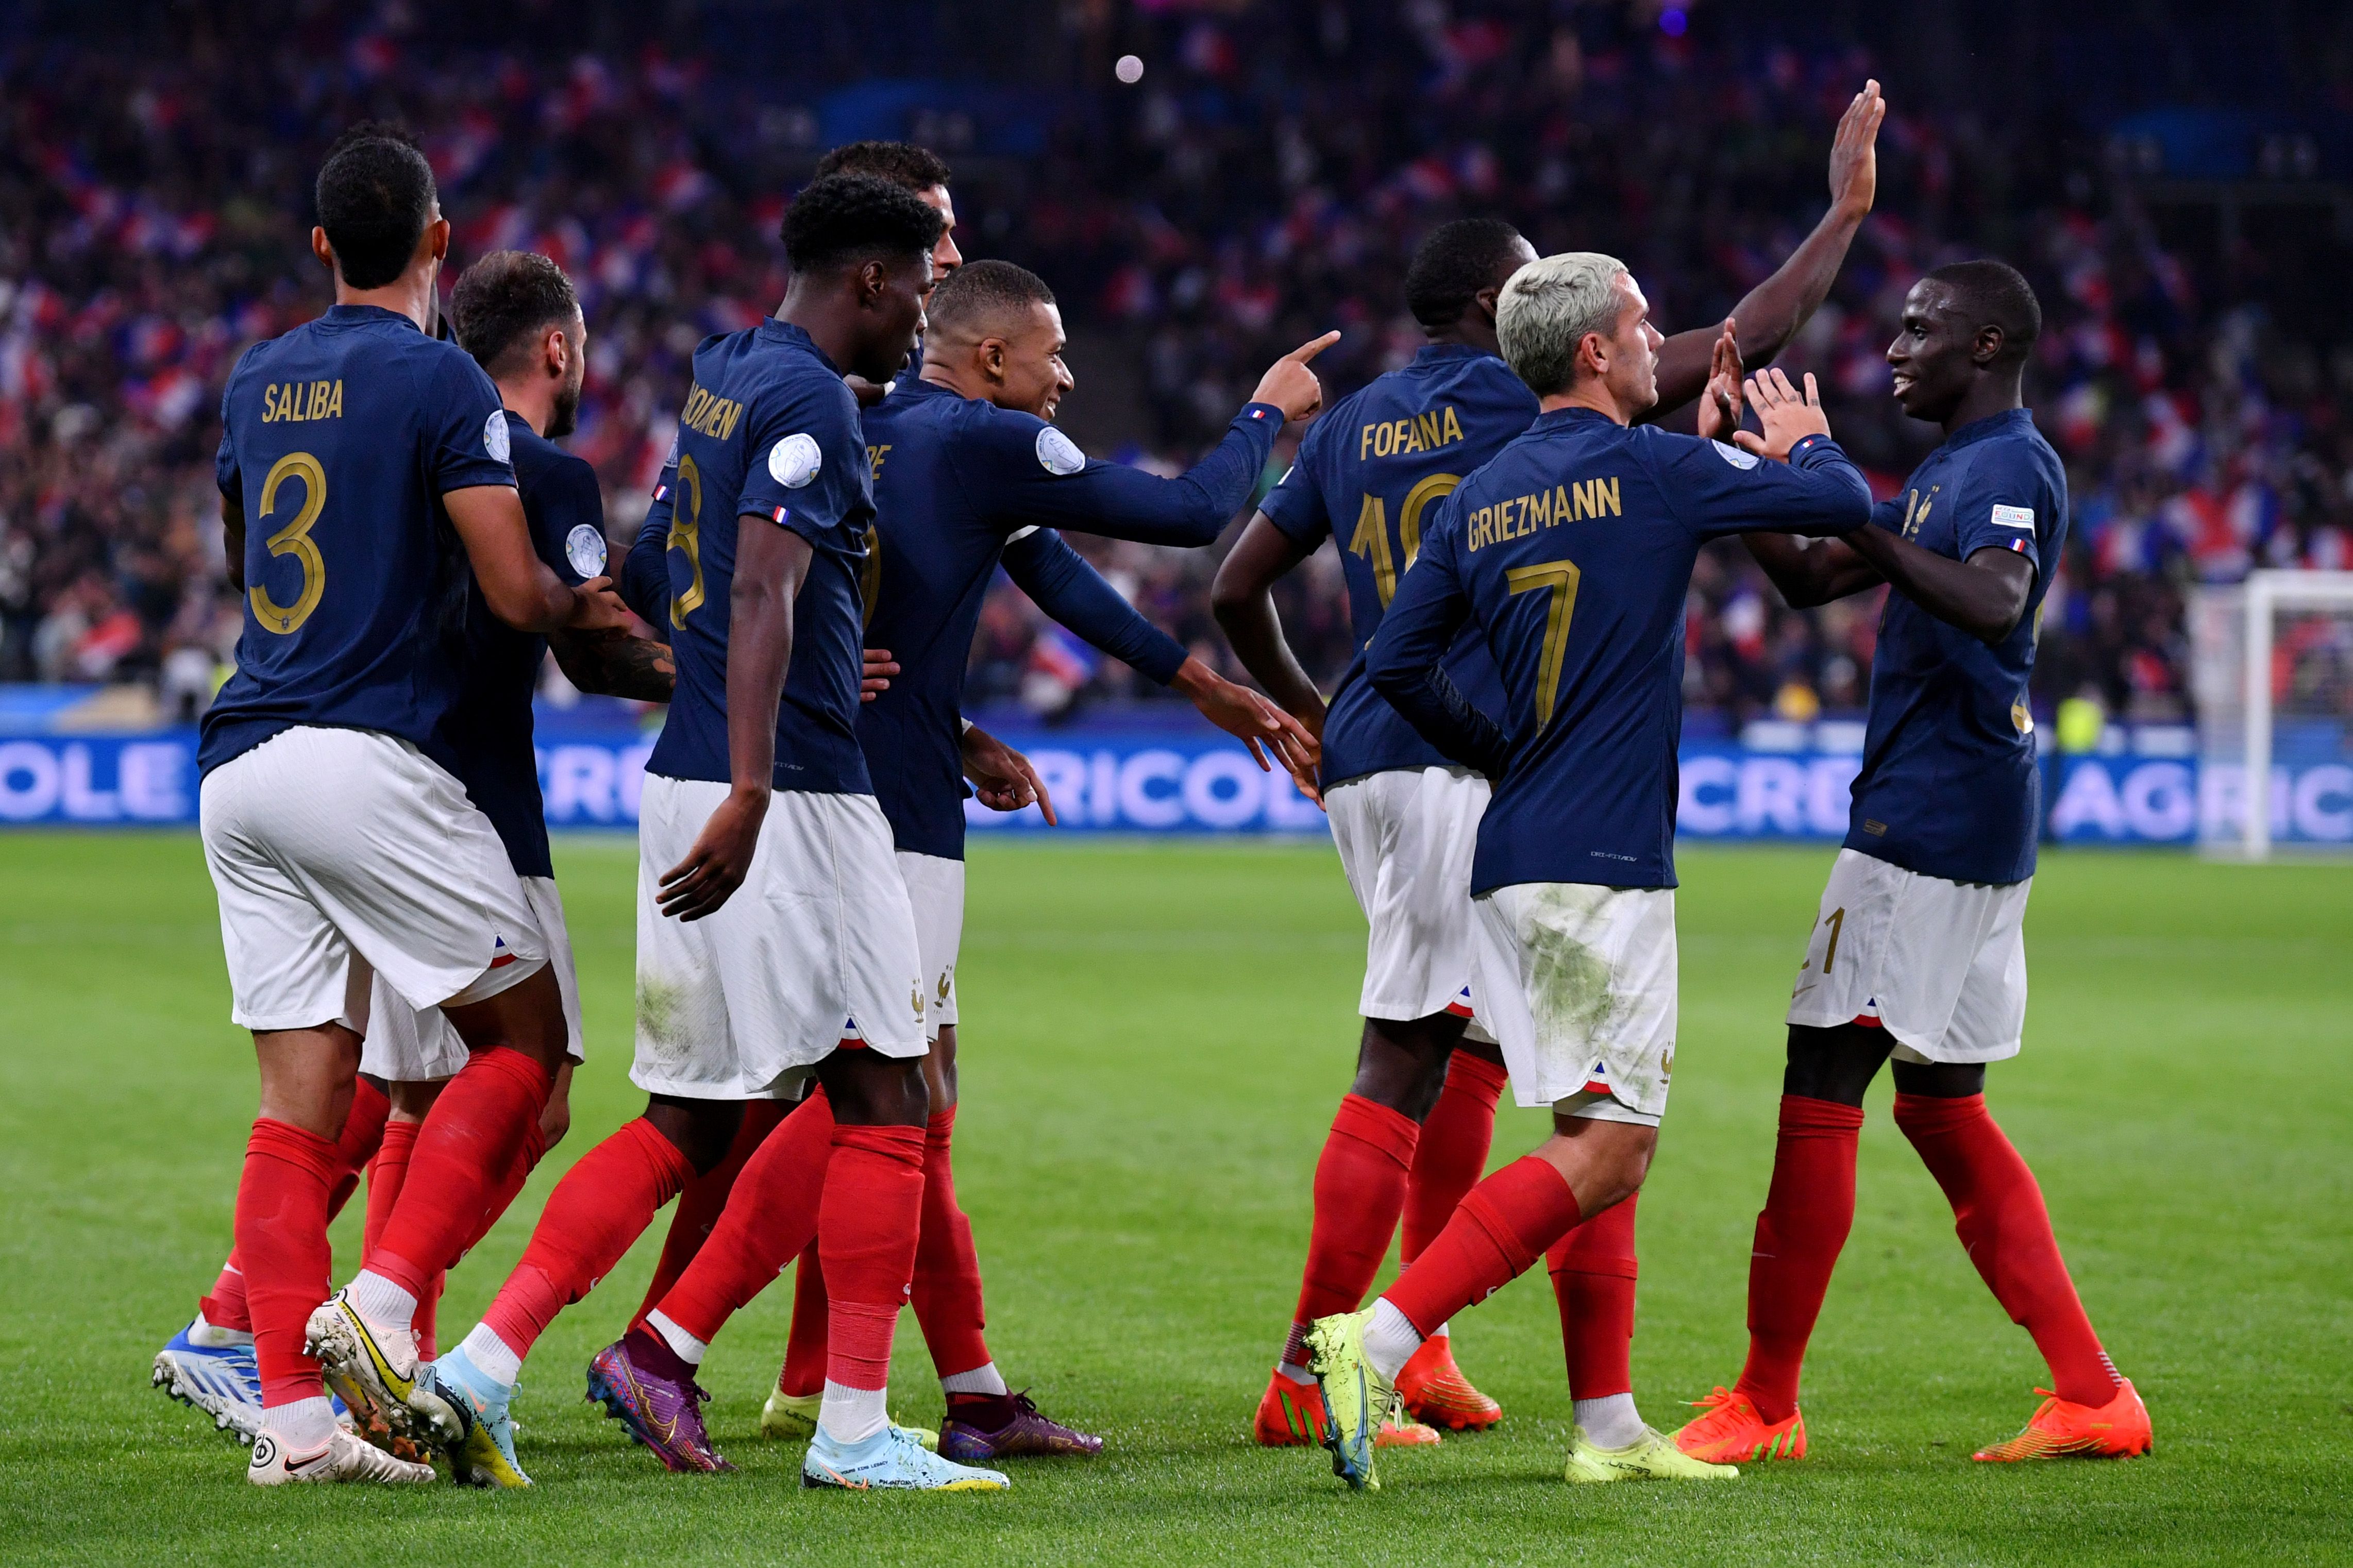 Kylian Mbappe of France celebrates with teammates after scoring their side's first goal during the UEFA Nations League League A Group 1 match between France and Austria at Stade de France on September 22, 2022 in Paris, France